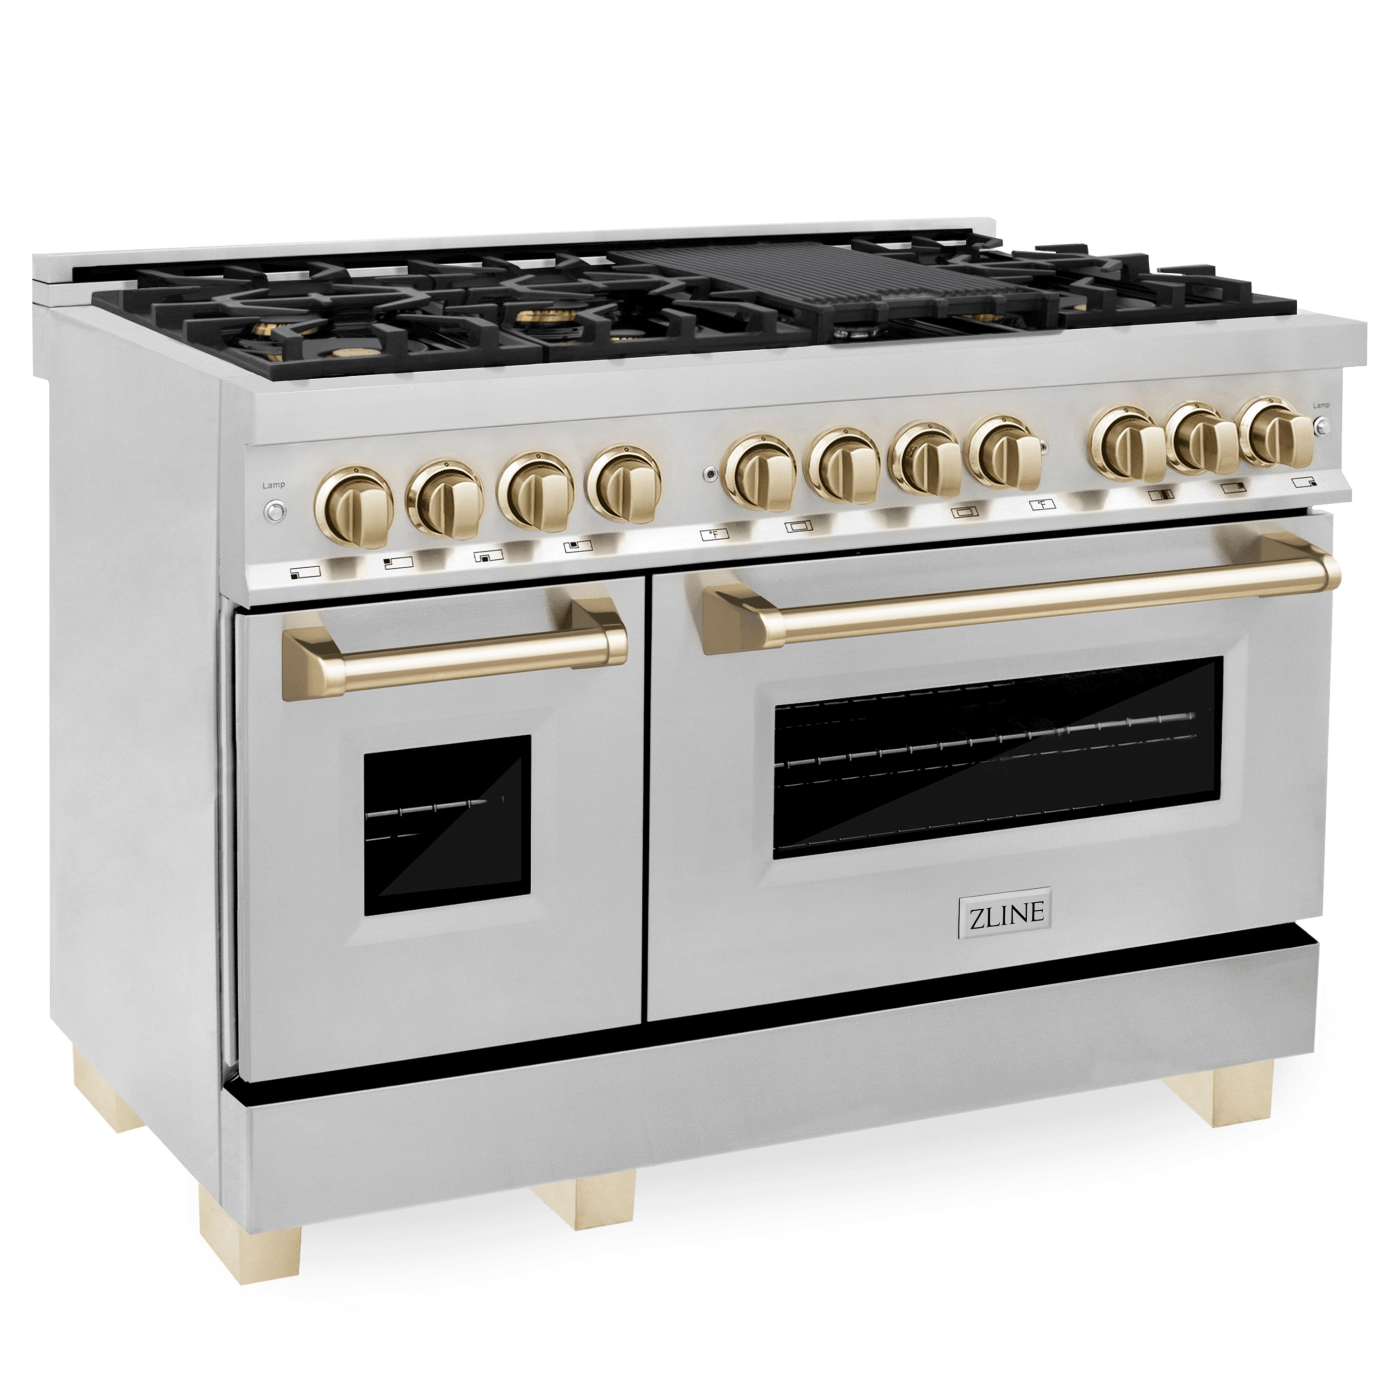 ZLINE Autograph Edition 48 in. 6.0 cu. ft. Dual Fuel Range with Gas Stove and Electric Oven in Stainless Steel with Accents (RAZ-48) - white background